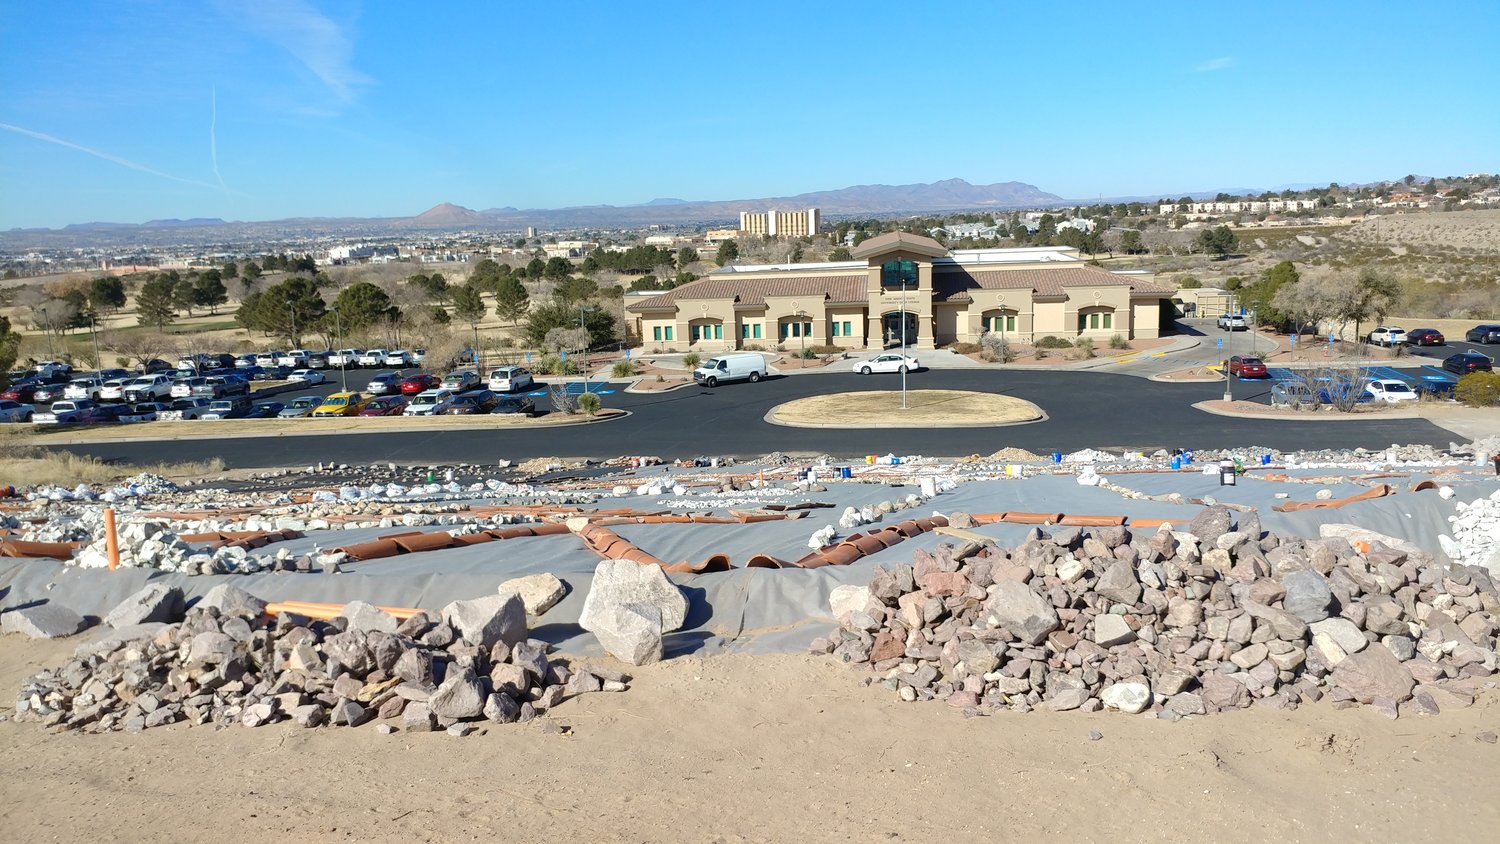 The view of the NMSU golf course club house from atop the hill where Kathy Morrow is creating her rock art project